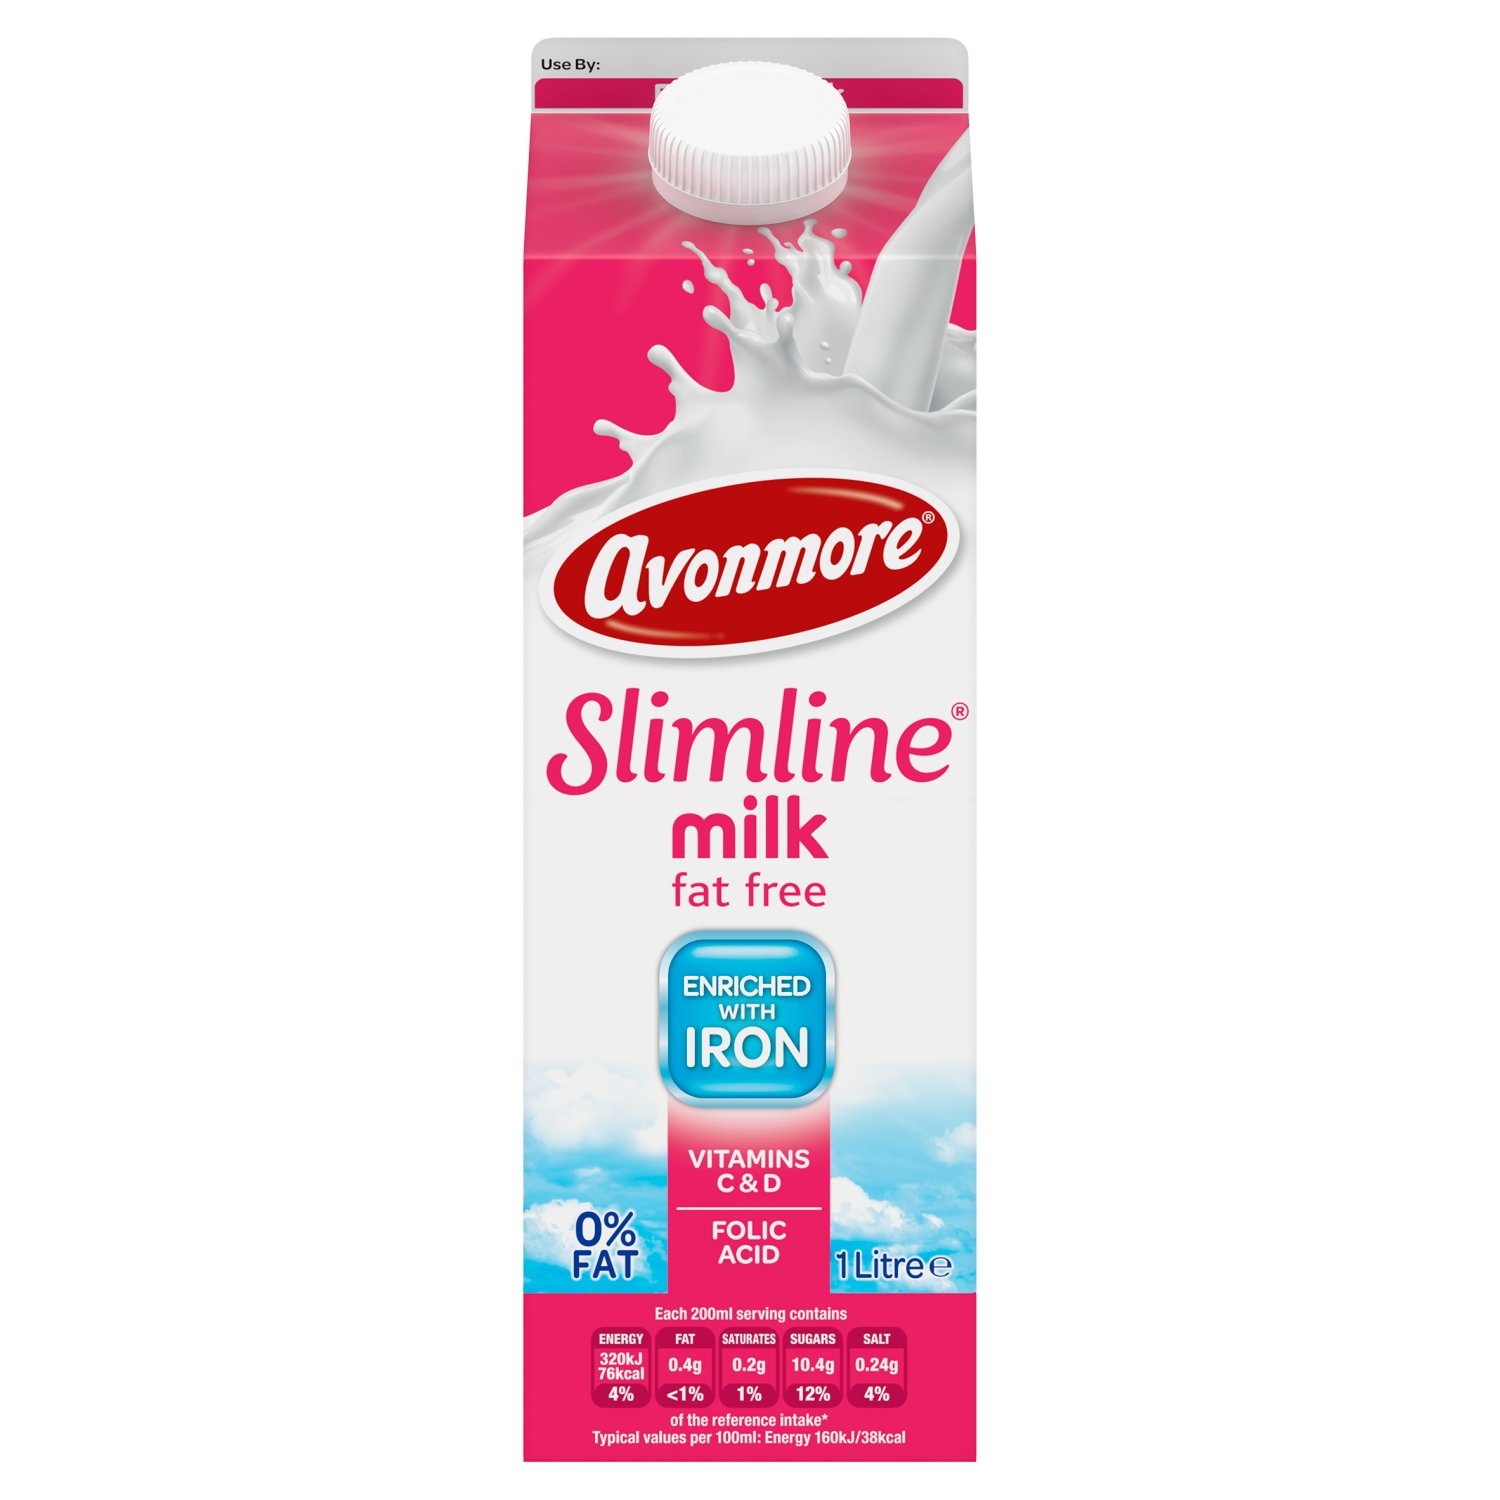 With so much going on in our lives, we all need a little help to keep us going throughout the day. Avonmore Slimline milk is a fat free milk, enriched with added iron and vitamin C.
Iron helps to guard us against tiredness and fatigue, while vitamin C helps our bodies absorb iron, which in turn helps release energy throughout the day. Avonmore Slimline milk is also enriched with folic acid and vitamin D; essential nutrients to help you feel your best.

Avonmore Slimline milk - All the goodness of milk without the fat!

Iron - helps guard against tiredness and fatigue.
Vitamin C - increases iron absorption.
Vitamin D - helps to absorb calcium and helps support normal immune function.
Folic Acid - contributes to normal psychological function.